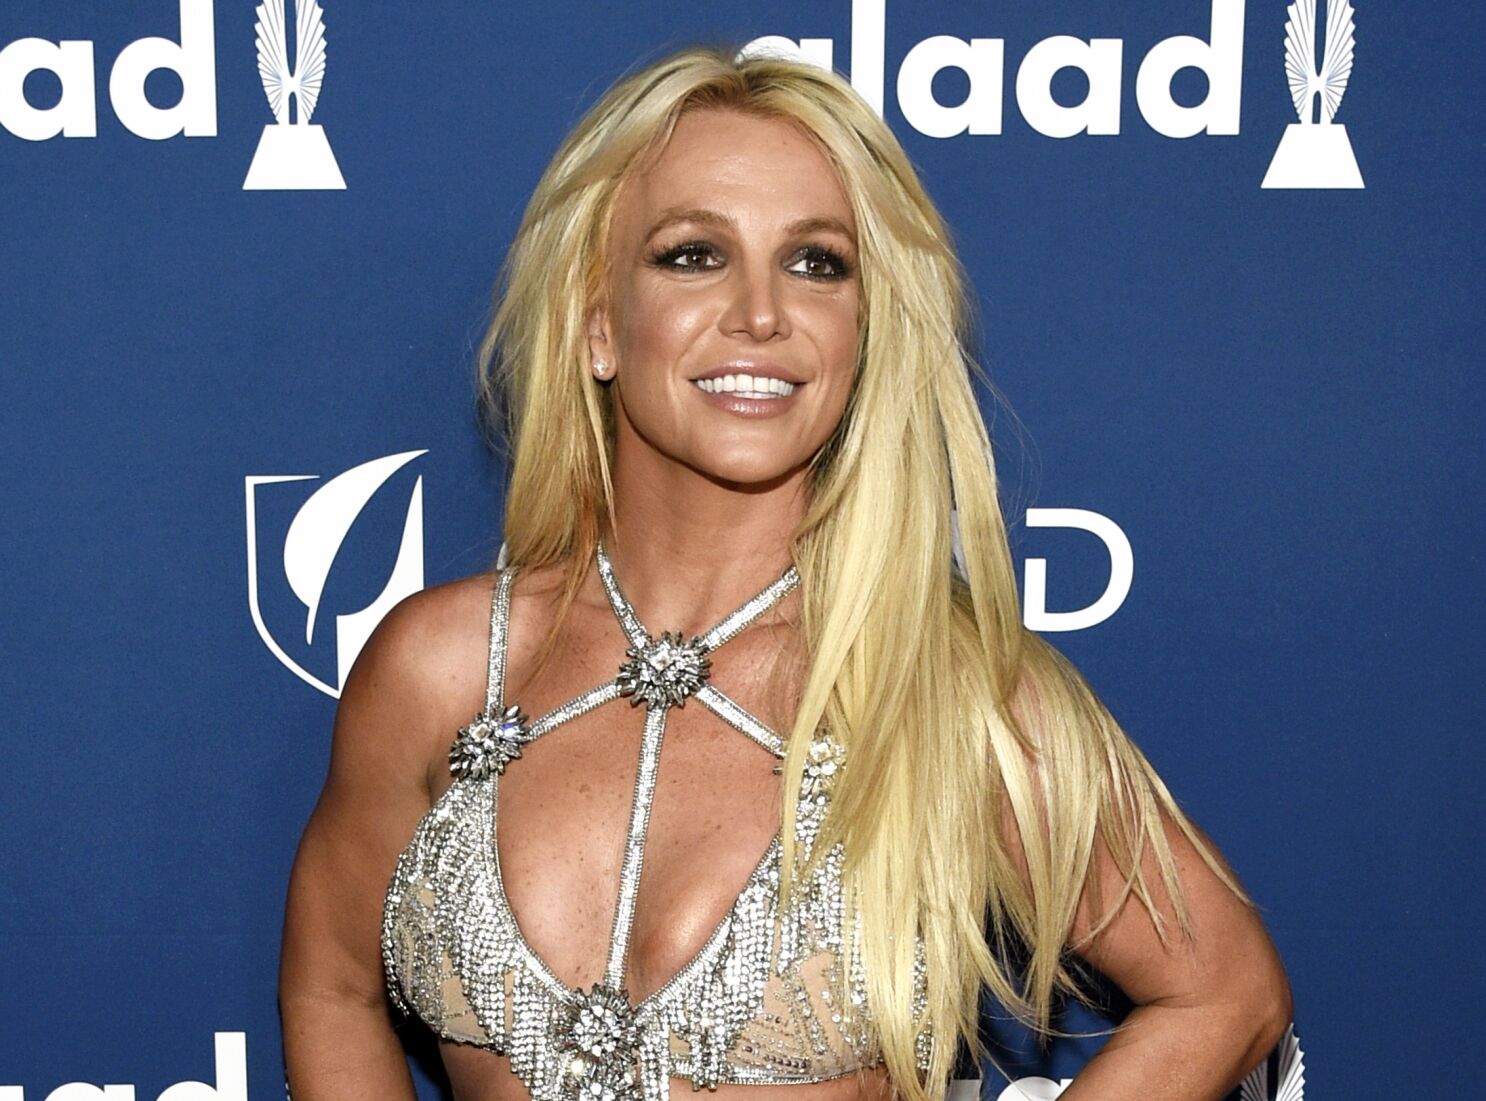 Britney Spears sings version of One More Time' - Los Angeles Times